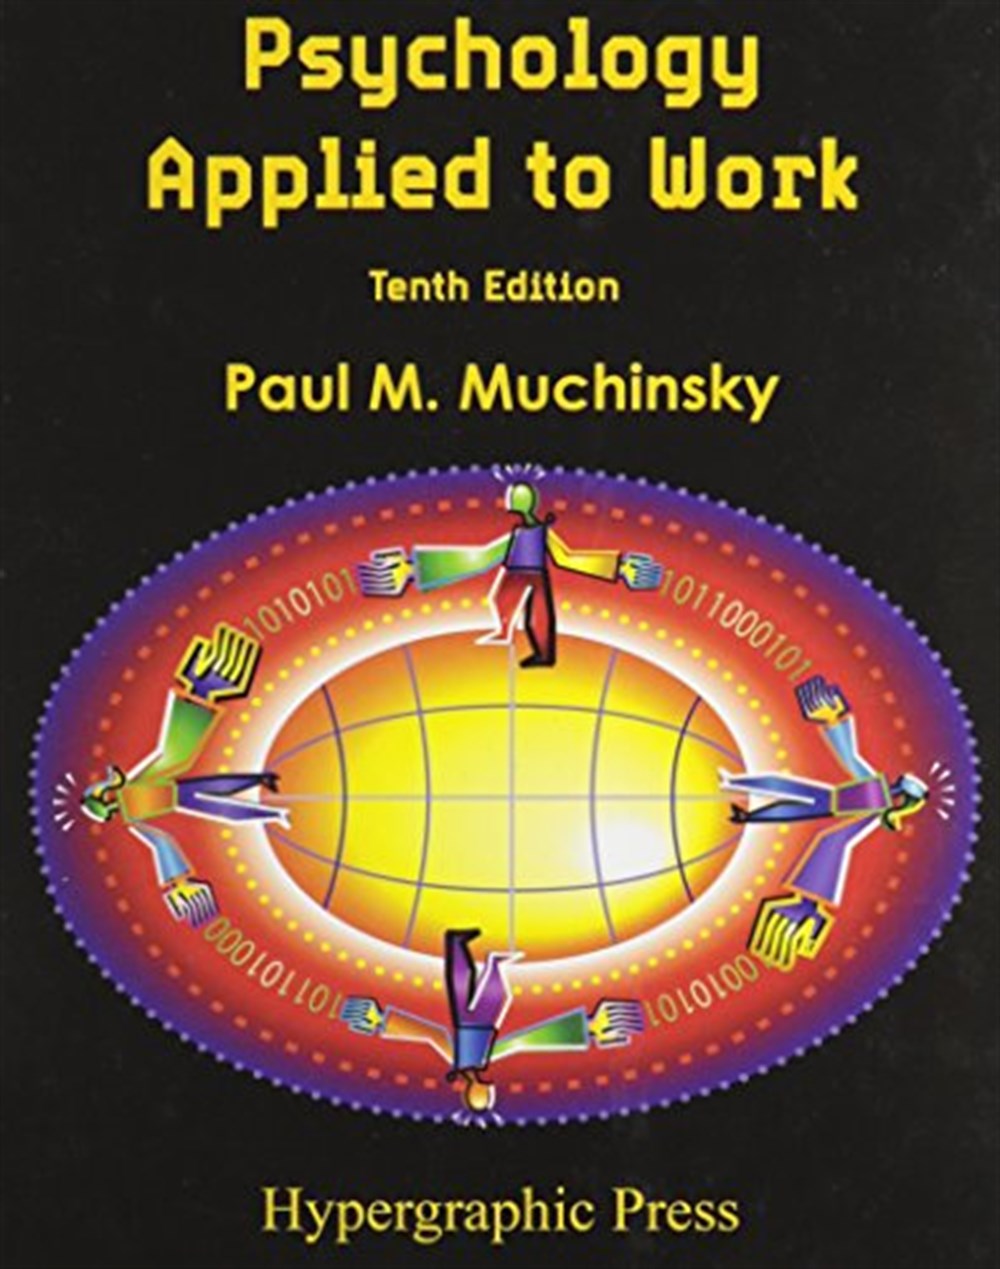 Psychology Applied to Work, 10th Ed.